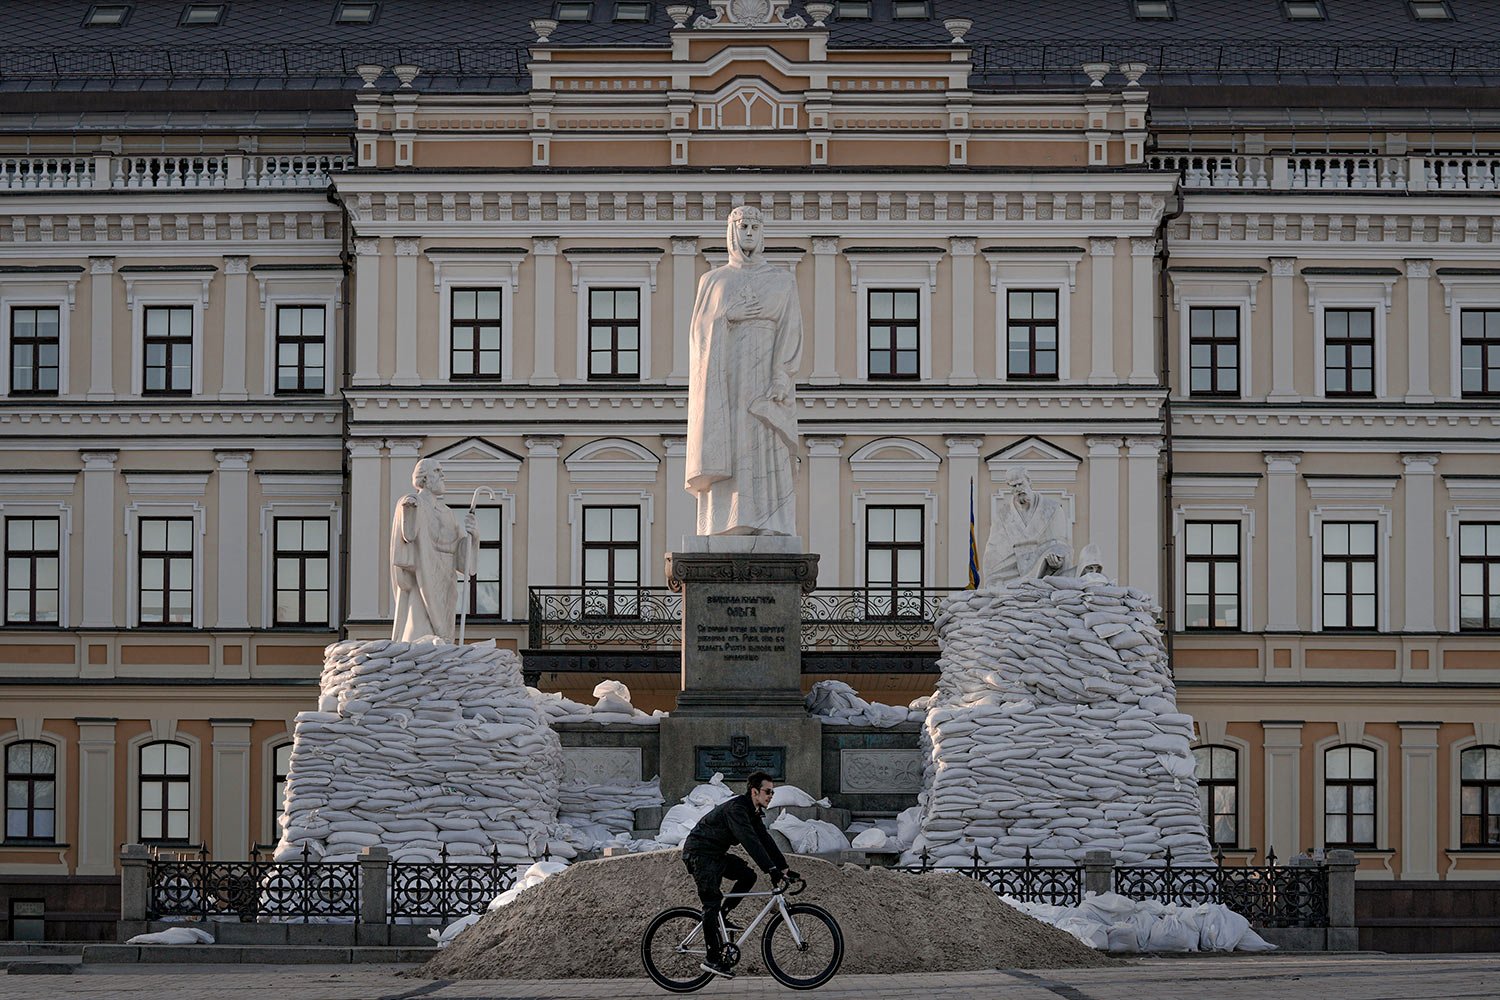  A man rides a bicycle backdropped by a statue of Grand Princess Olga of Kyiv, in the process of being covered in sandbags to avoid damage from potential shelling, in Kyiv, Ukraine, Monday, March 28, 2022. (AP Photo/Vadim Ghirda) 